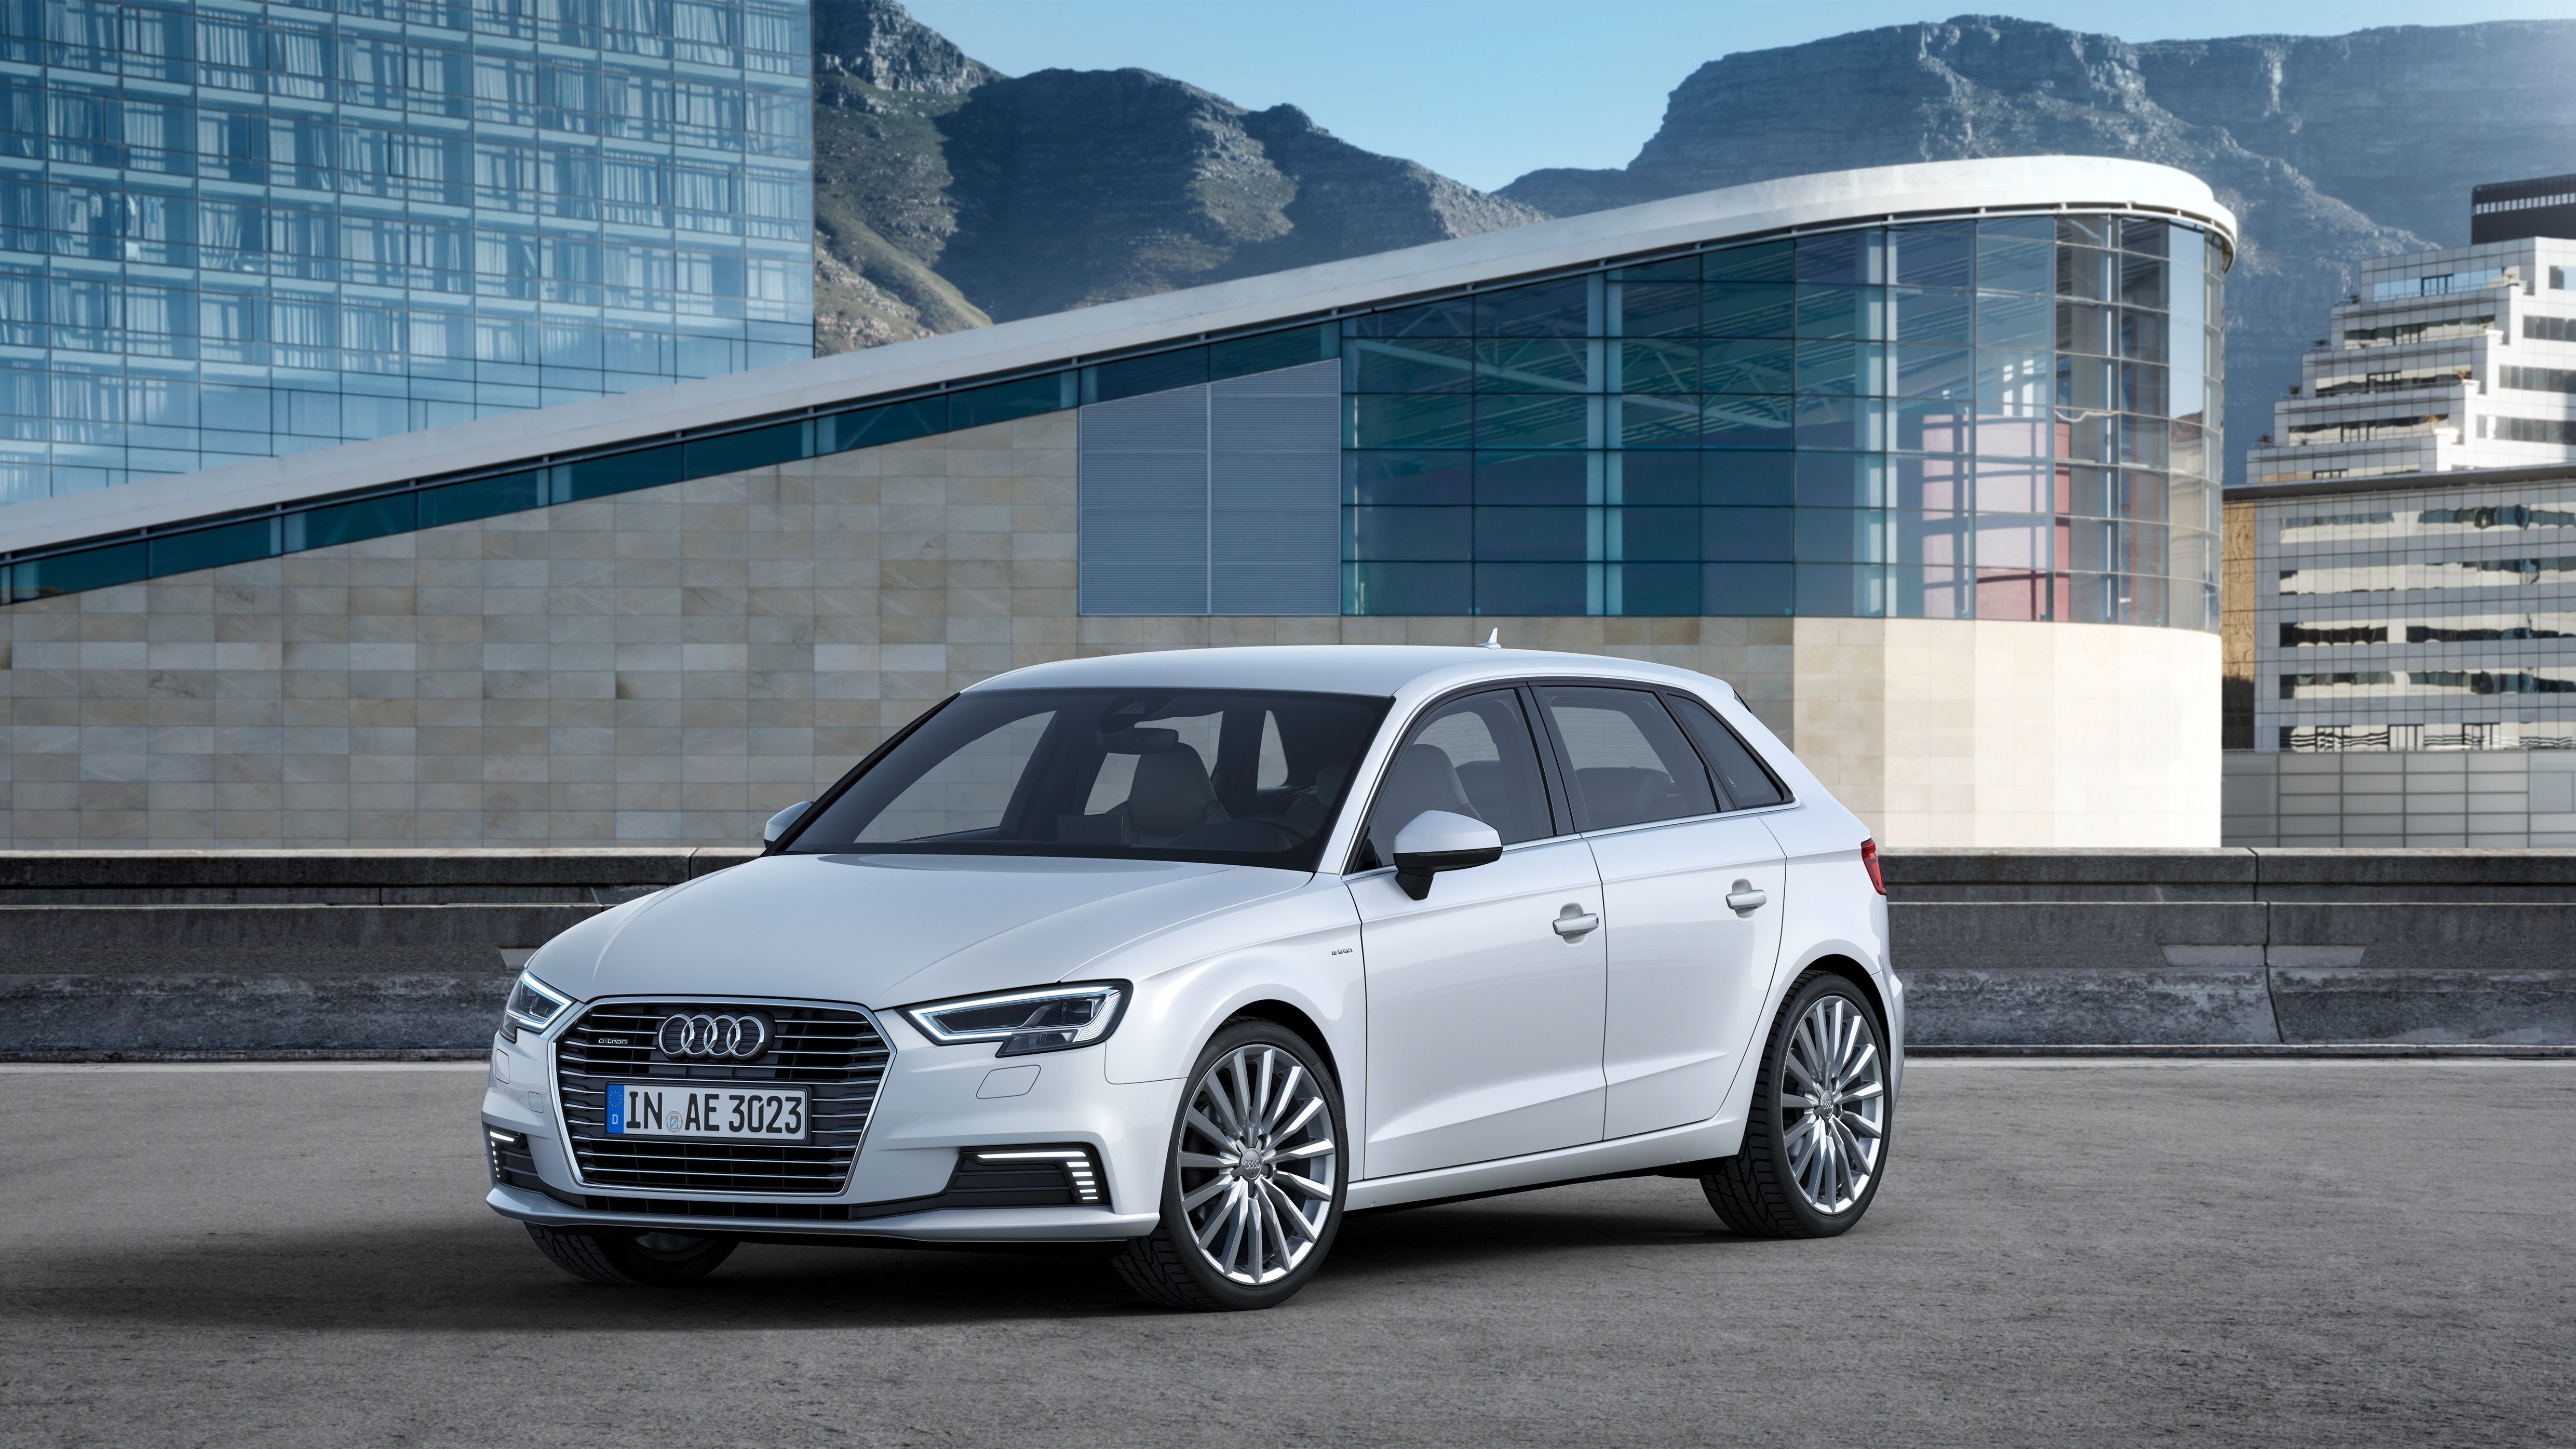 2017 Audi A3 e tron Priced From 39 850 It s 1K More Than Before autoevolution